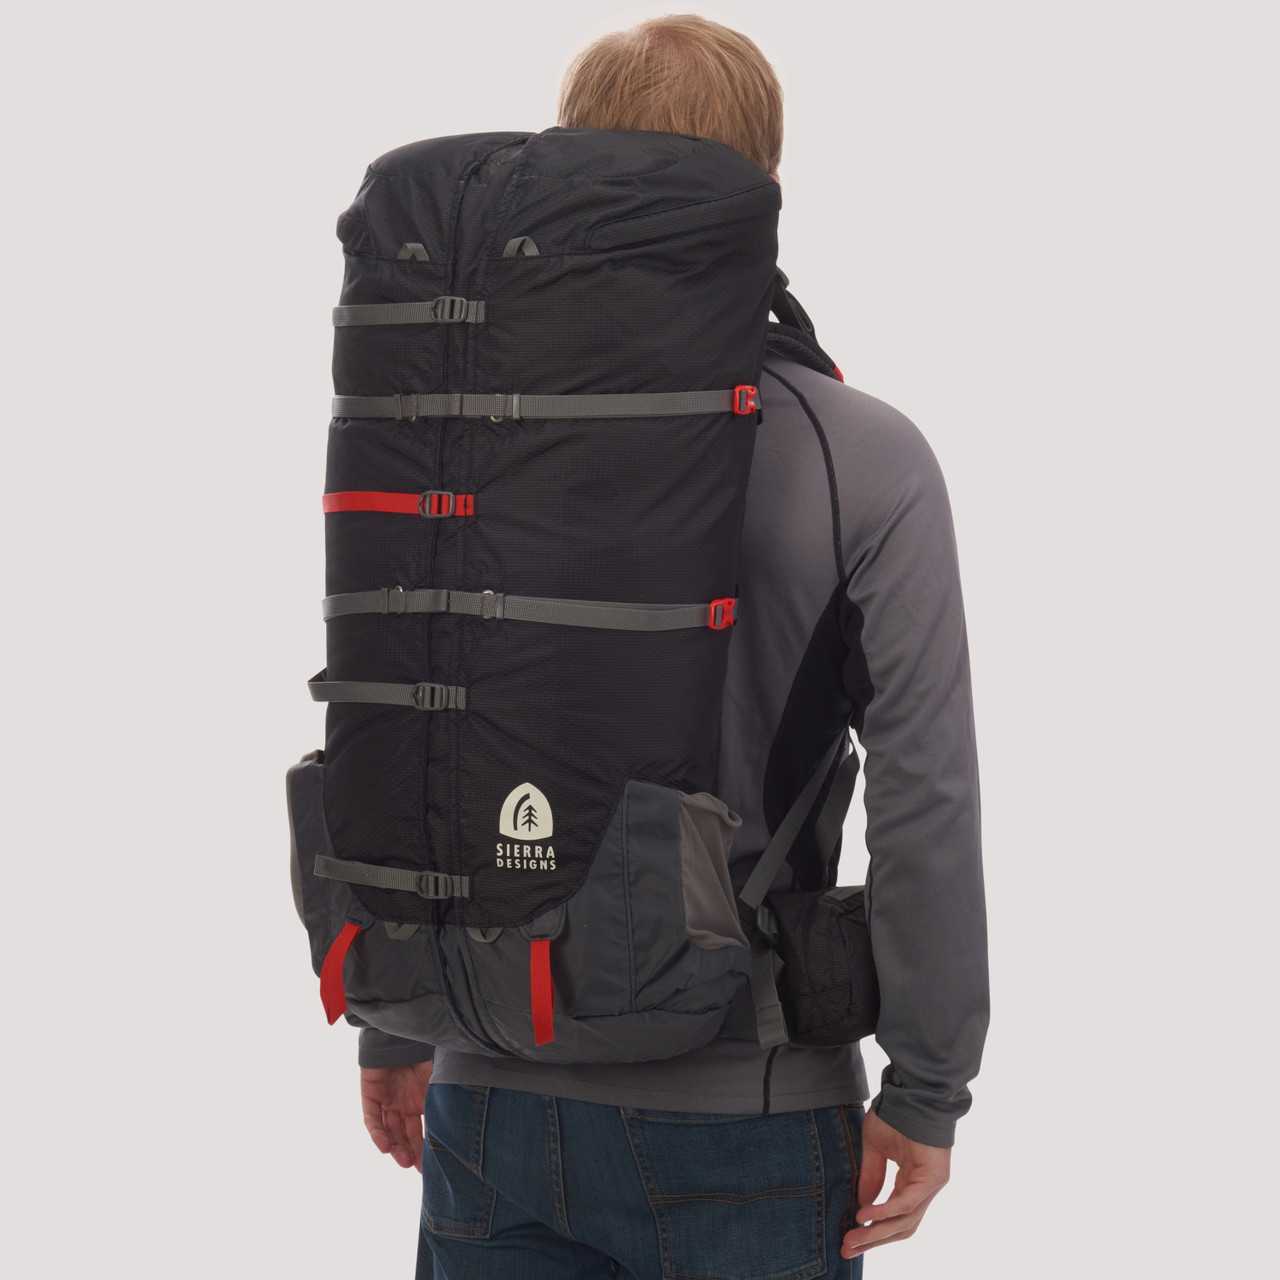 CAPACITOR BACKPACK